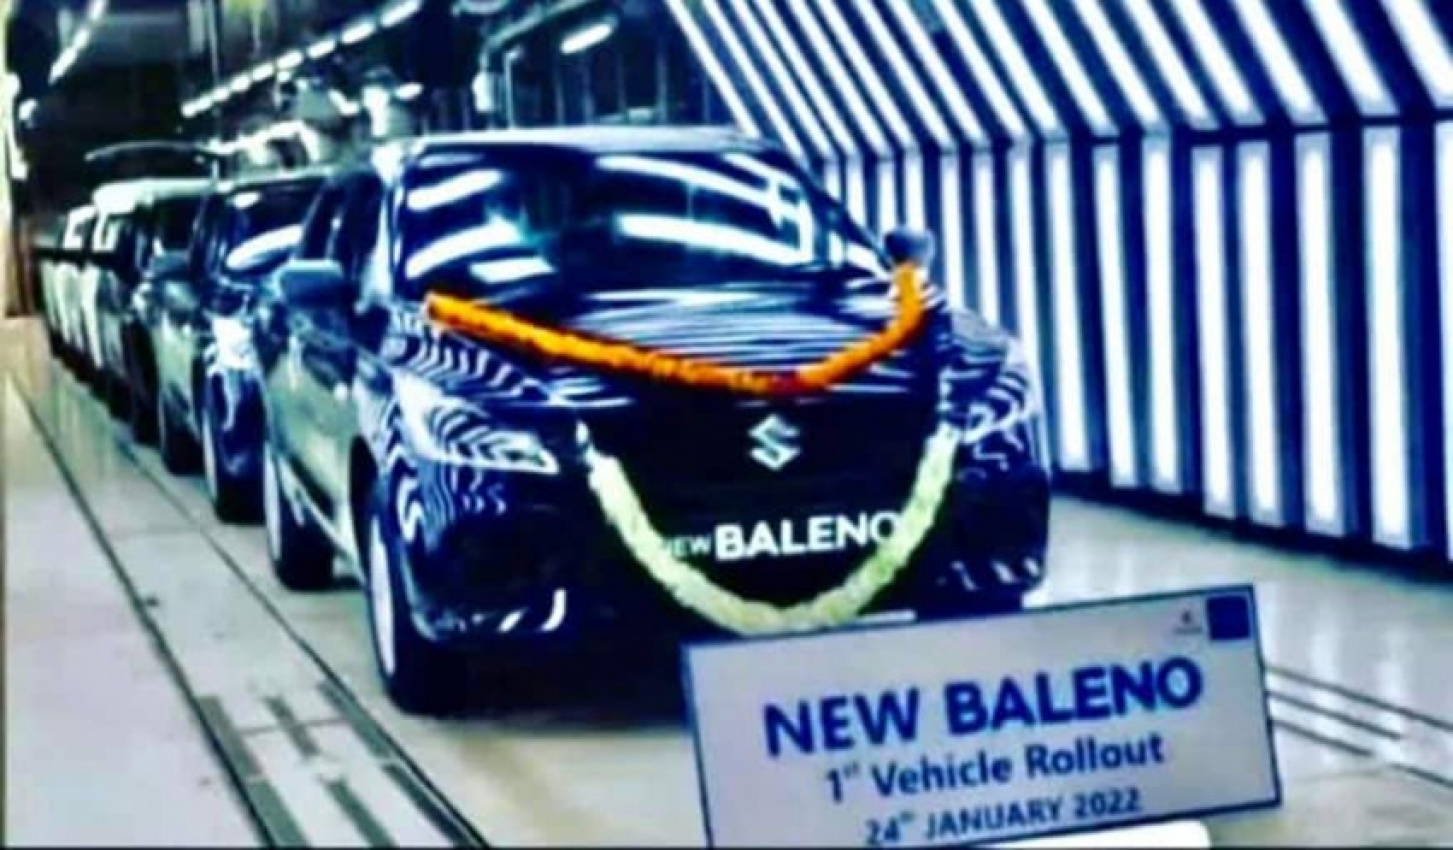 android, autos, cars, suzuki, auto news, baleno facelift, carandbike, maruti suzuki, maruti suzuki baleno, maruti suzuki baleno facelift, new baleno launch, news, android, 2022 maruti suzuki baleno facelift production begins; launch expected in february